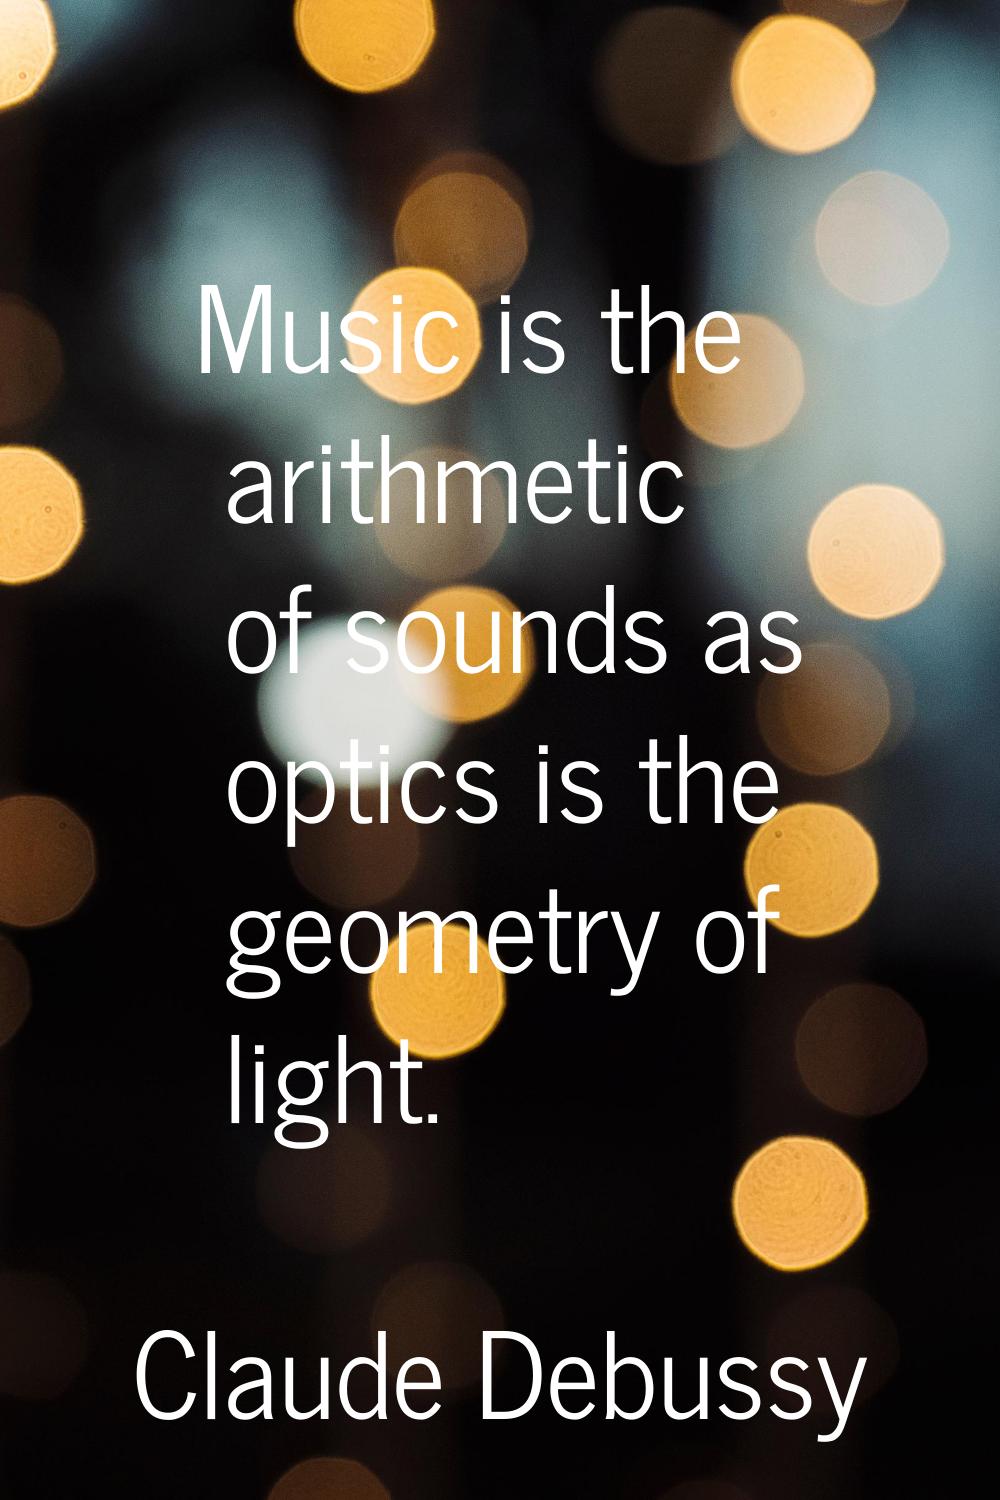 Music is the arithmetic of sounds as optics is the geometry of light.